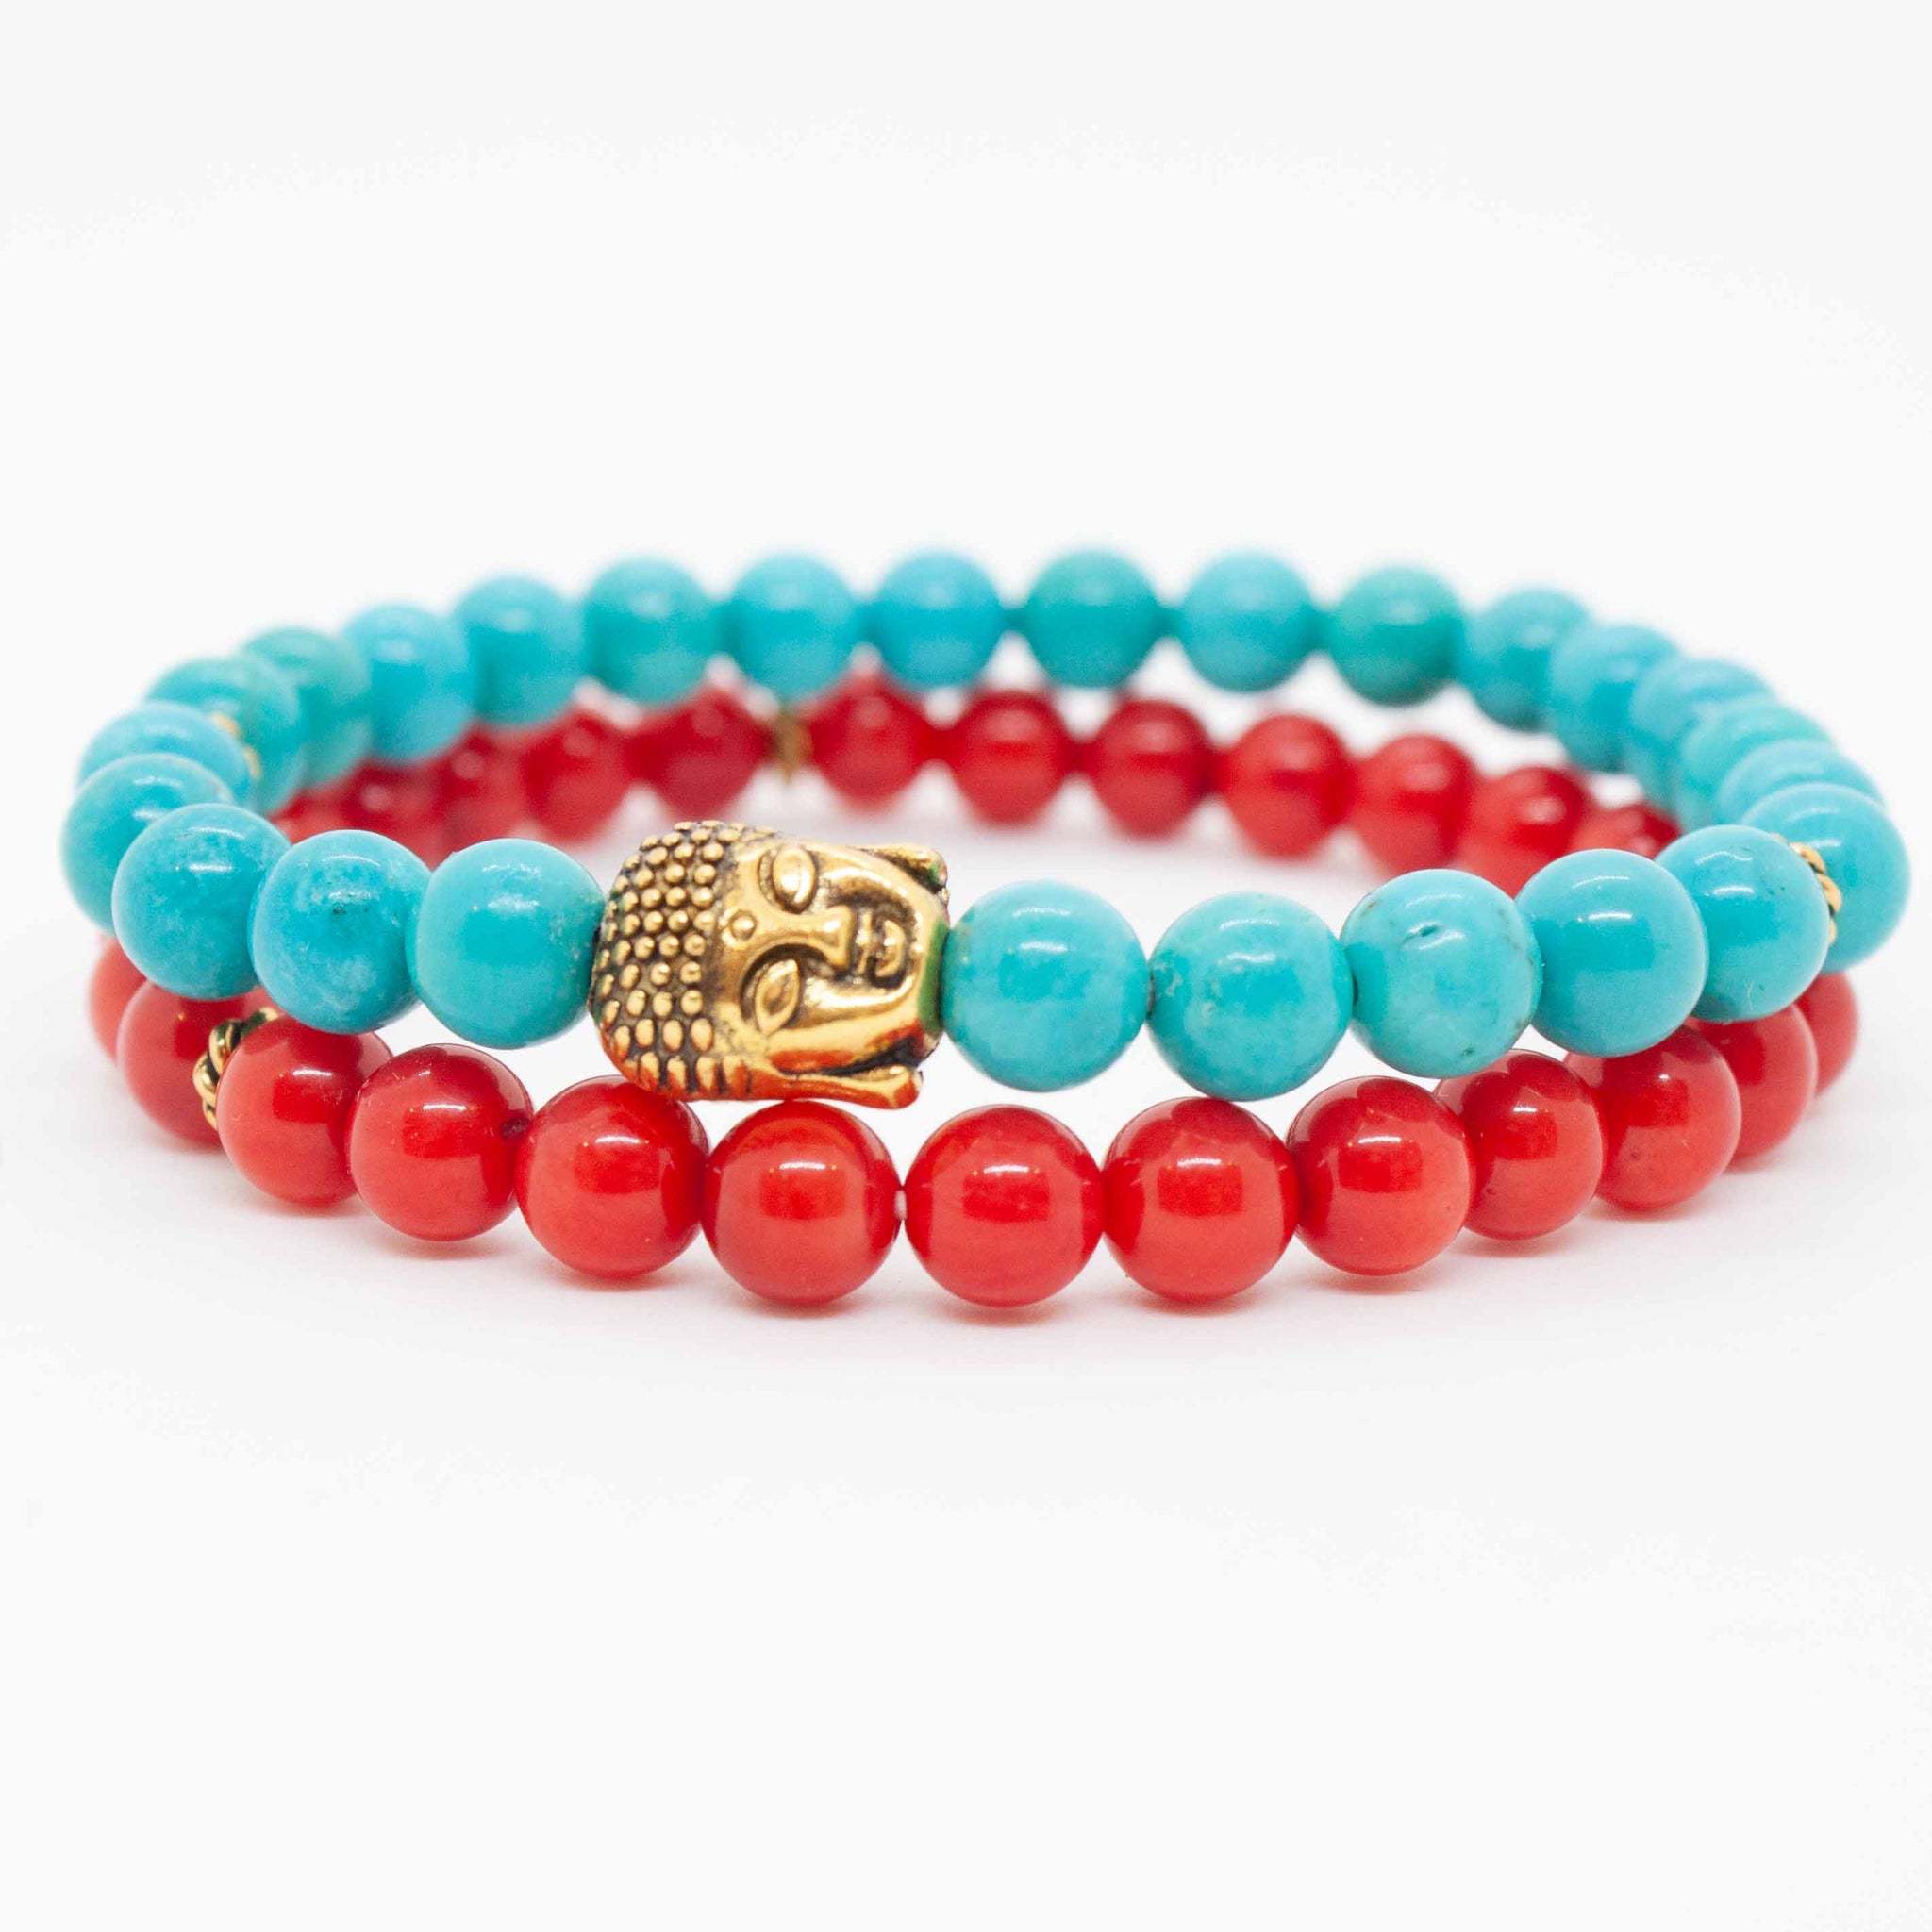 Our summer version of our best-selling buddha bracelet stack! Coral and turquoise complement each other beautifully in this fun yet soothing wristlet. Two 7 inch bracelets made with synthetic* turquoise & coral beads and brass buddha, double strung with silk elastic. Handmade in Toronto by kp jewelry co. *synthetic turquoise and coral are a cost efficient and sustainable alternative to the real thing.